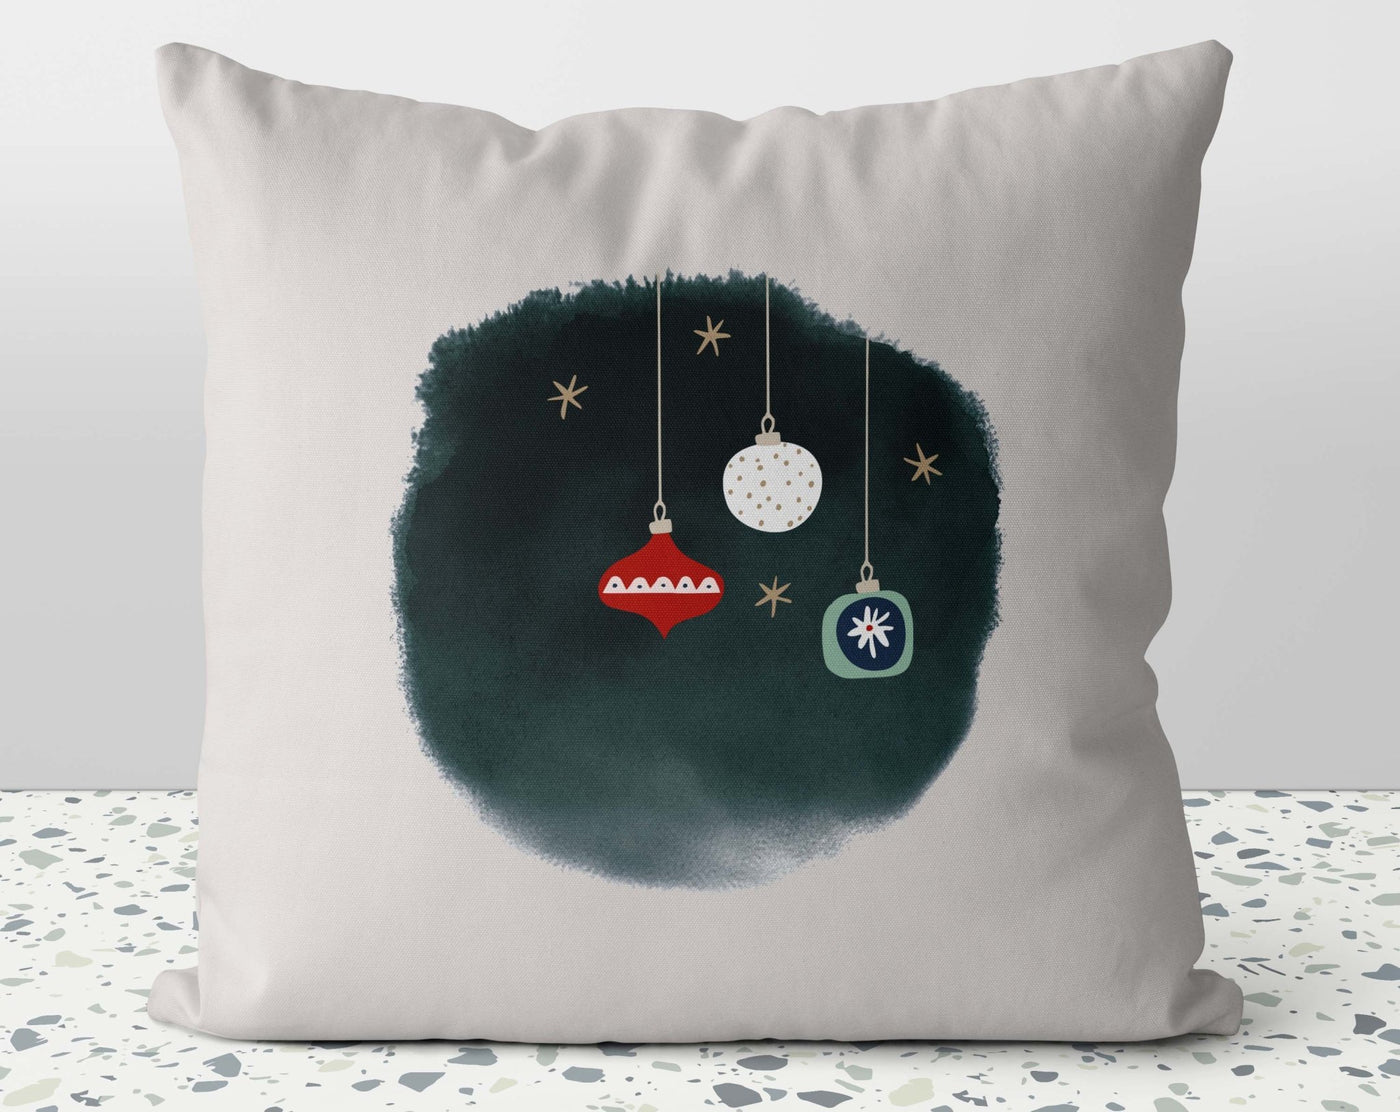 Christmas Ornaments Pillow Throw Cover with Insert - Cush Potato Pillows